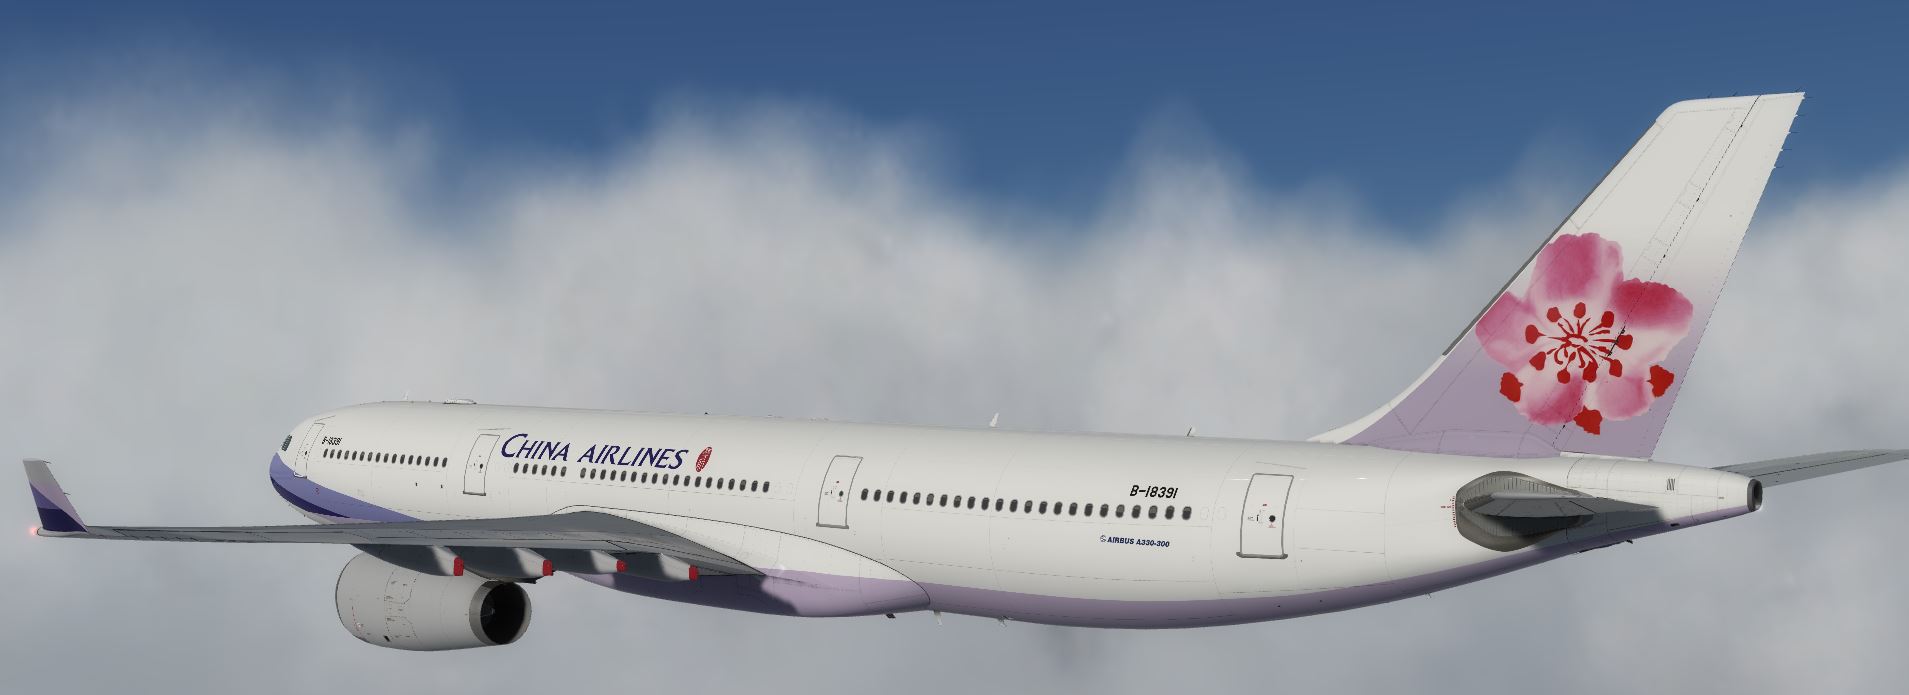 AS A330 ChinaAirline-4091 